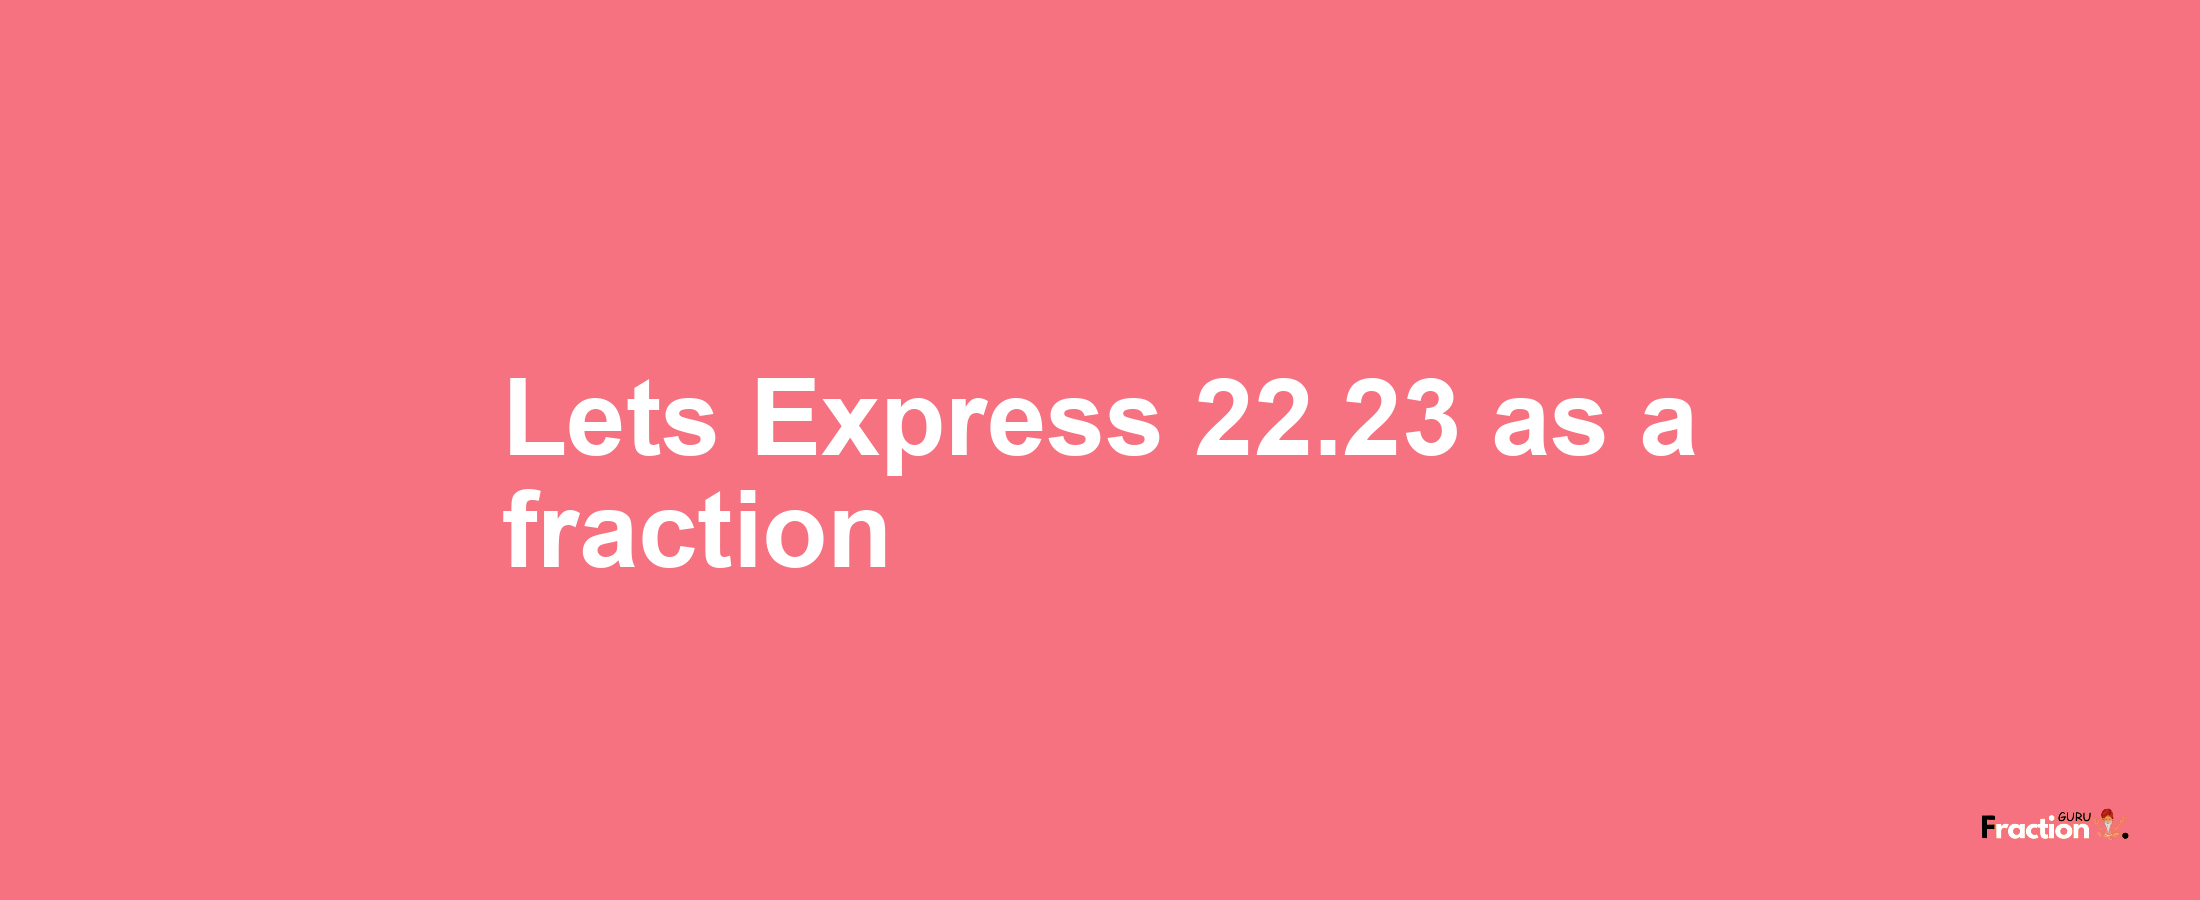 Lets Express 22.23 as afraction